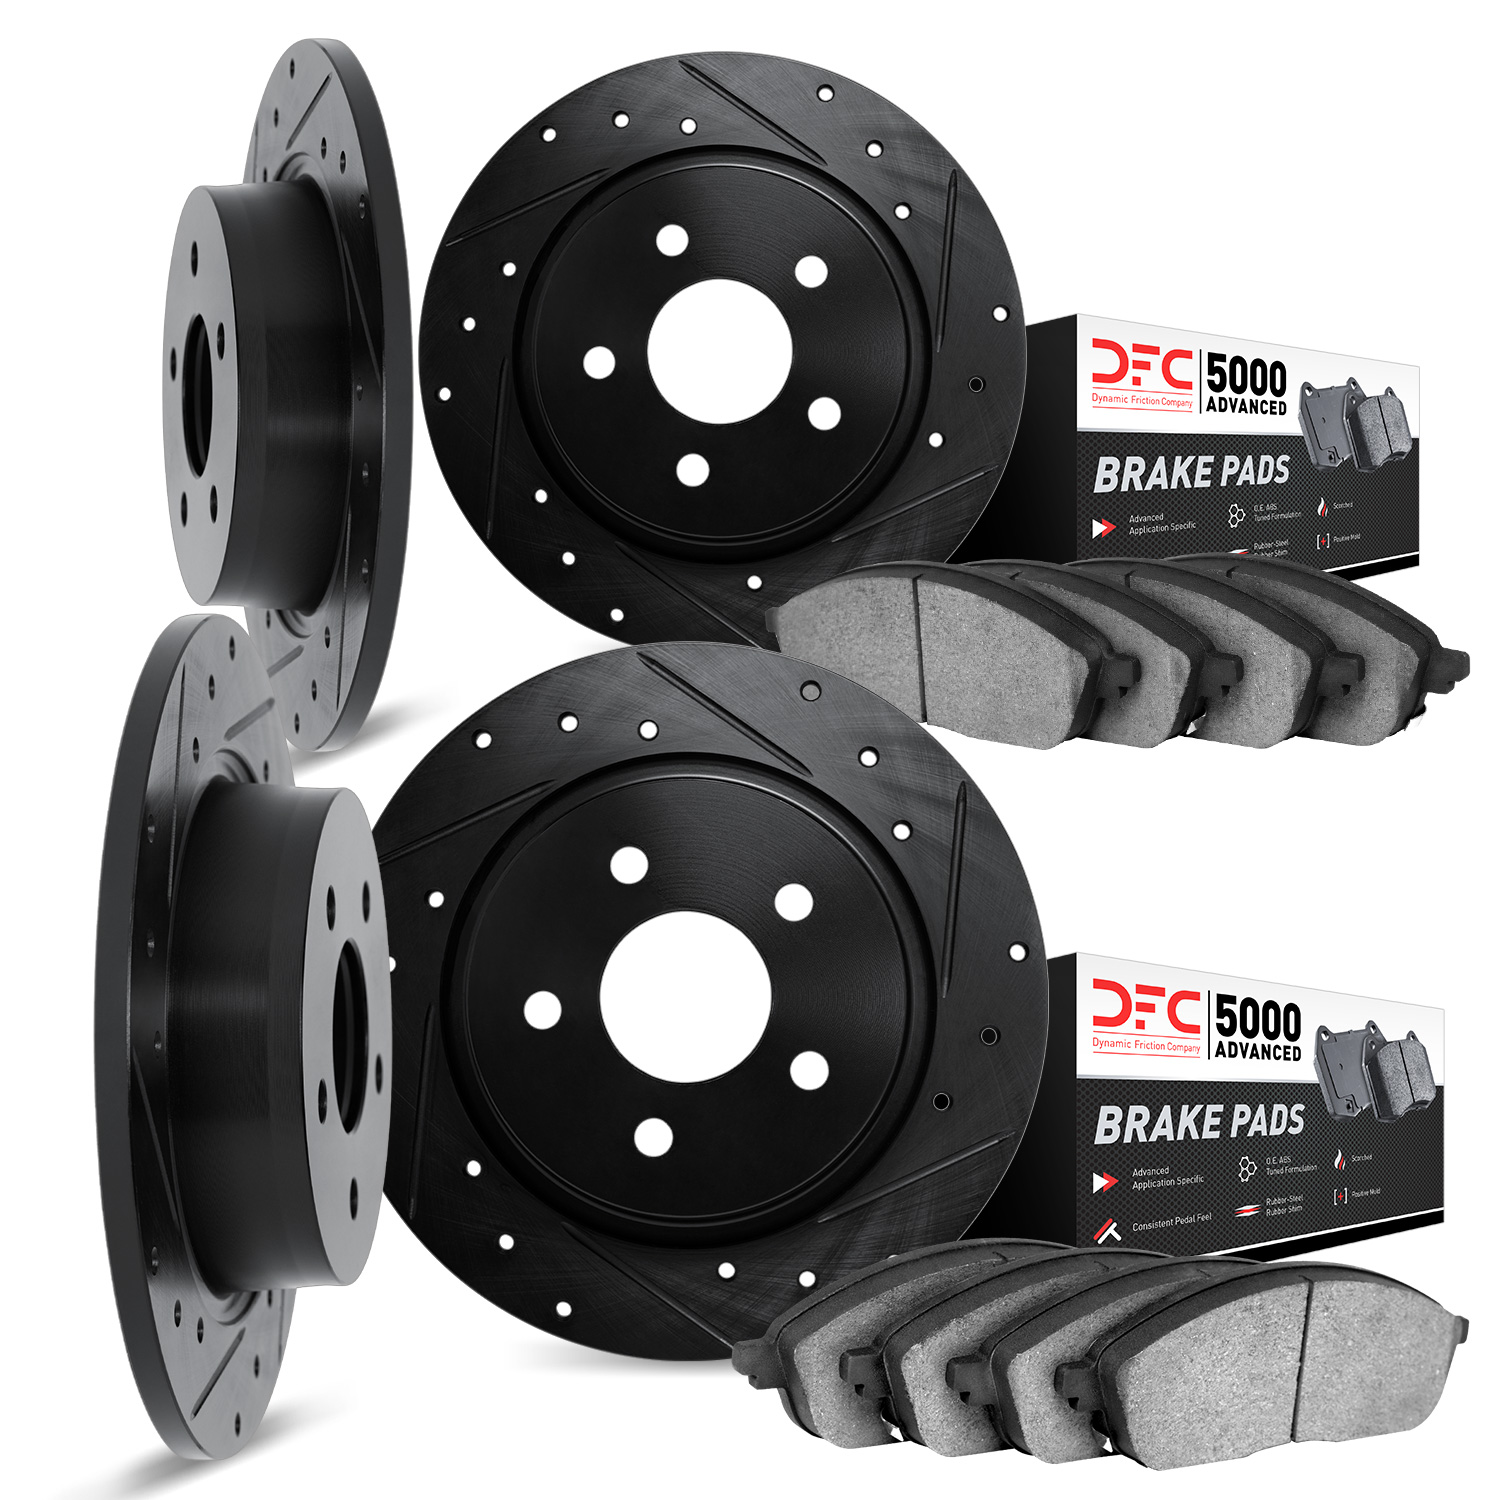 8504-11004 Drilled/Slotted Brake Rotors w/5000 Advanced Brake Pads Kit [Black], 1987-1989 Land Rover, Position: Front and Rear